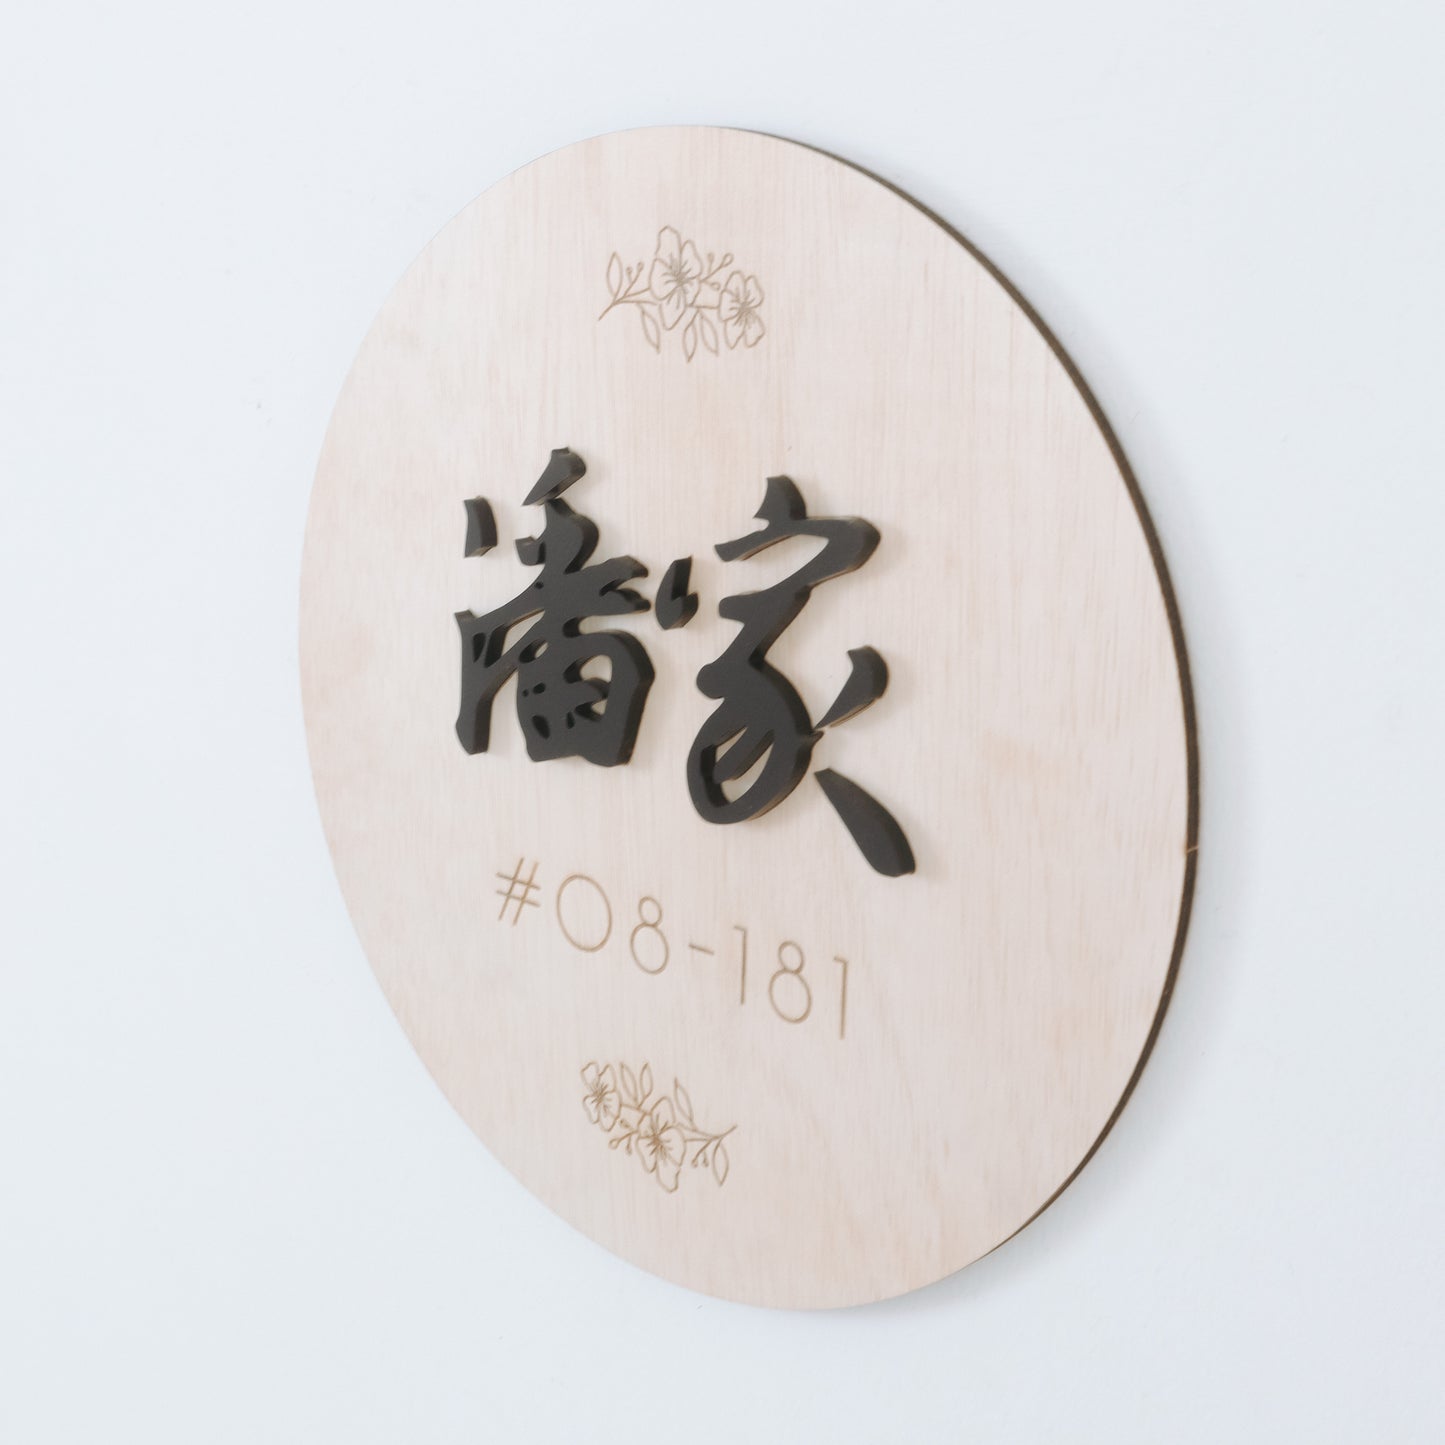 Family Surname + Unit Number Signage (Round)